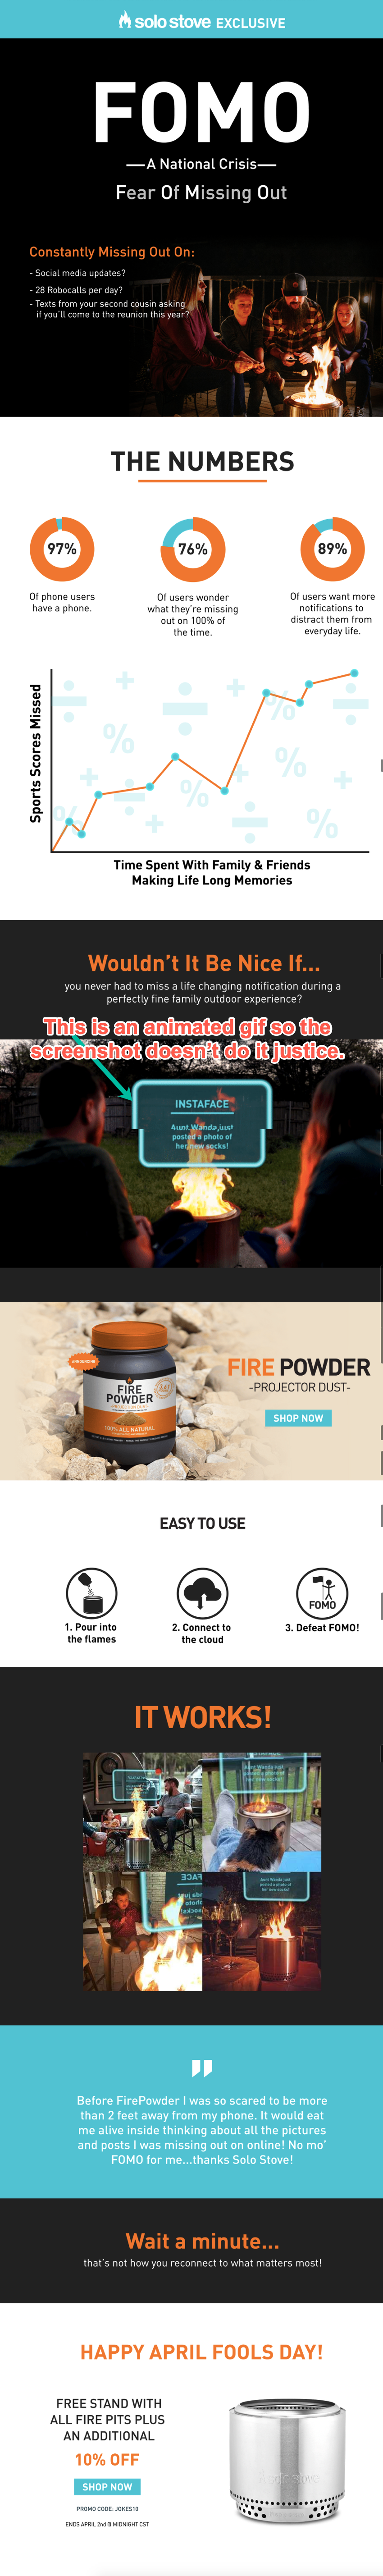 Solo stove landing page.